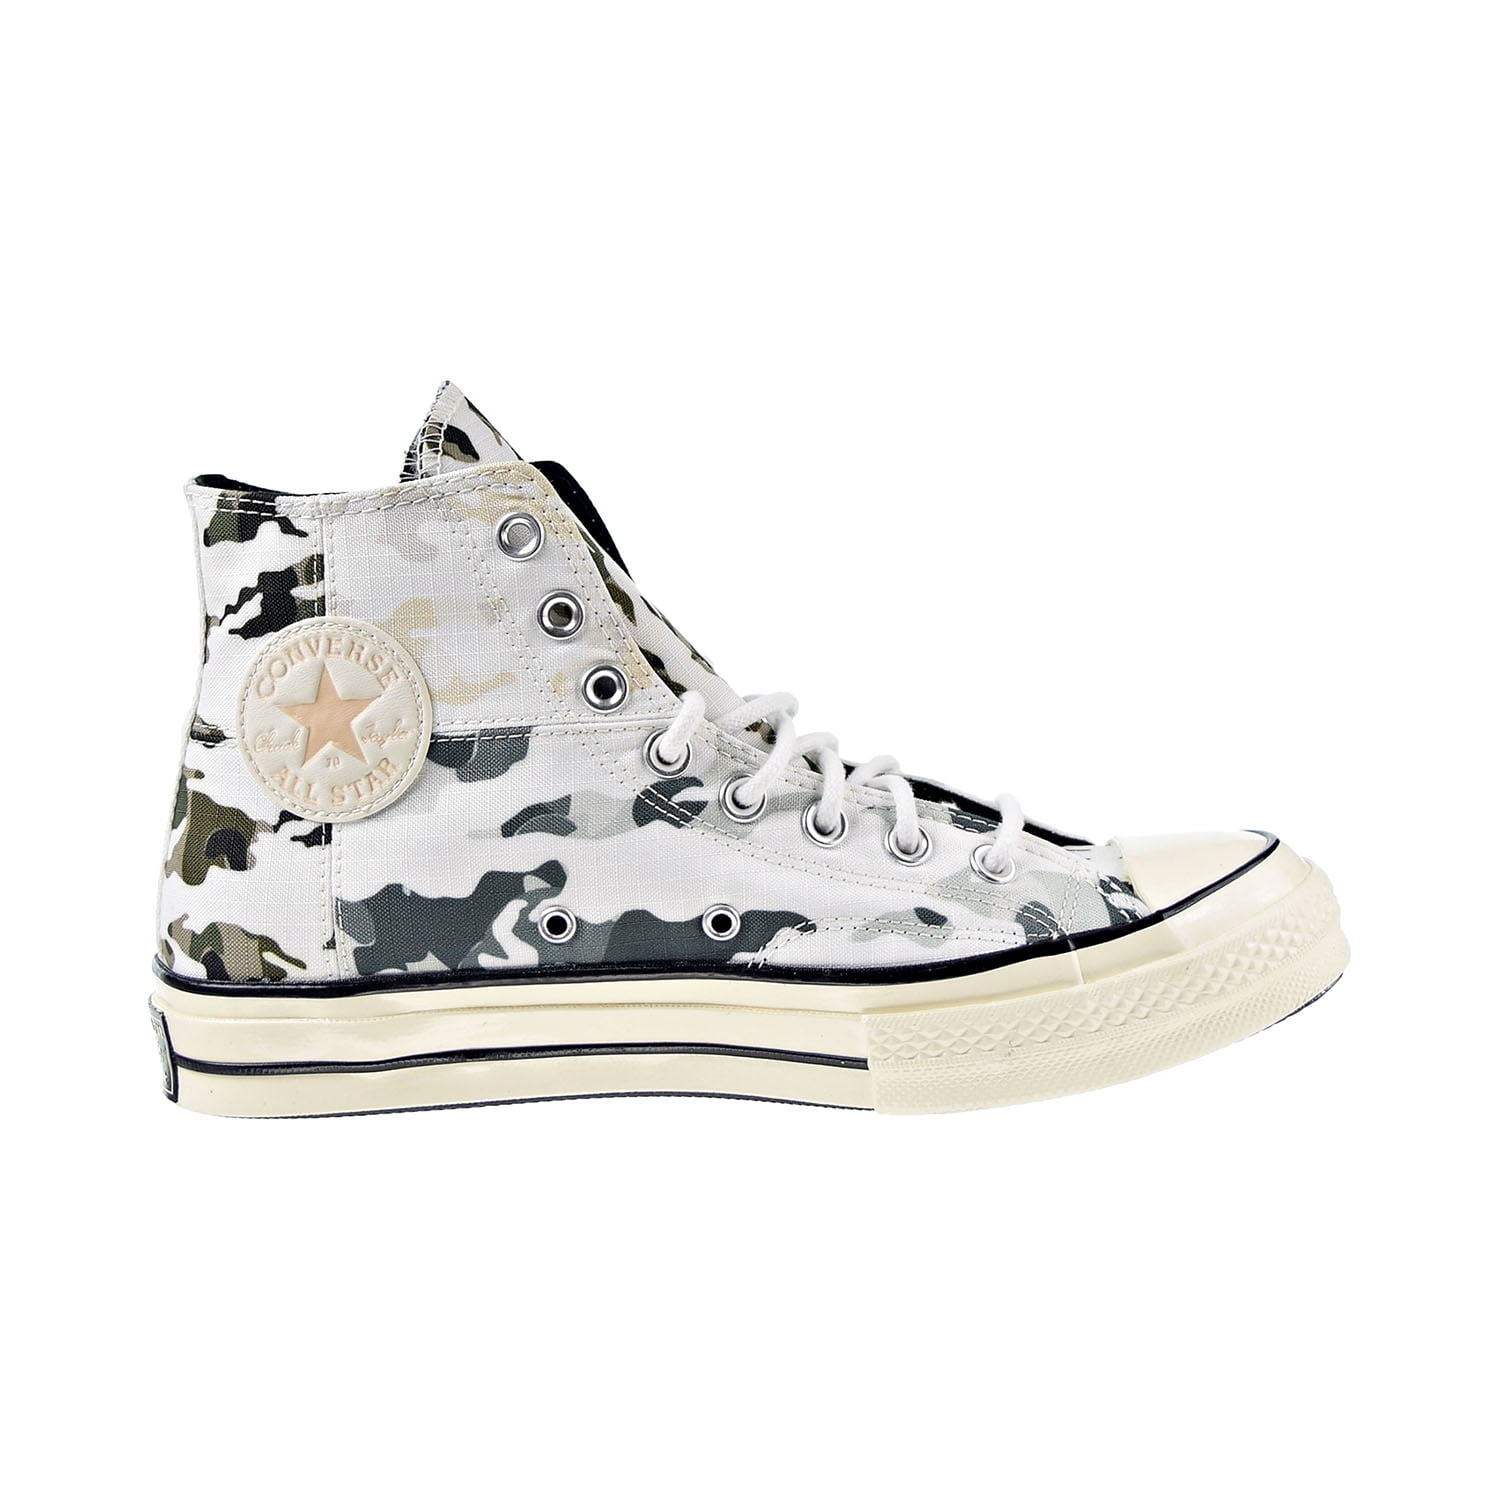 Buy > converse camo shoes > in stock